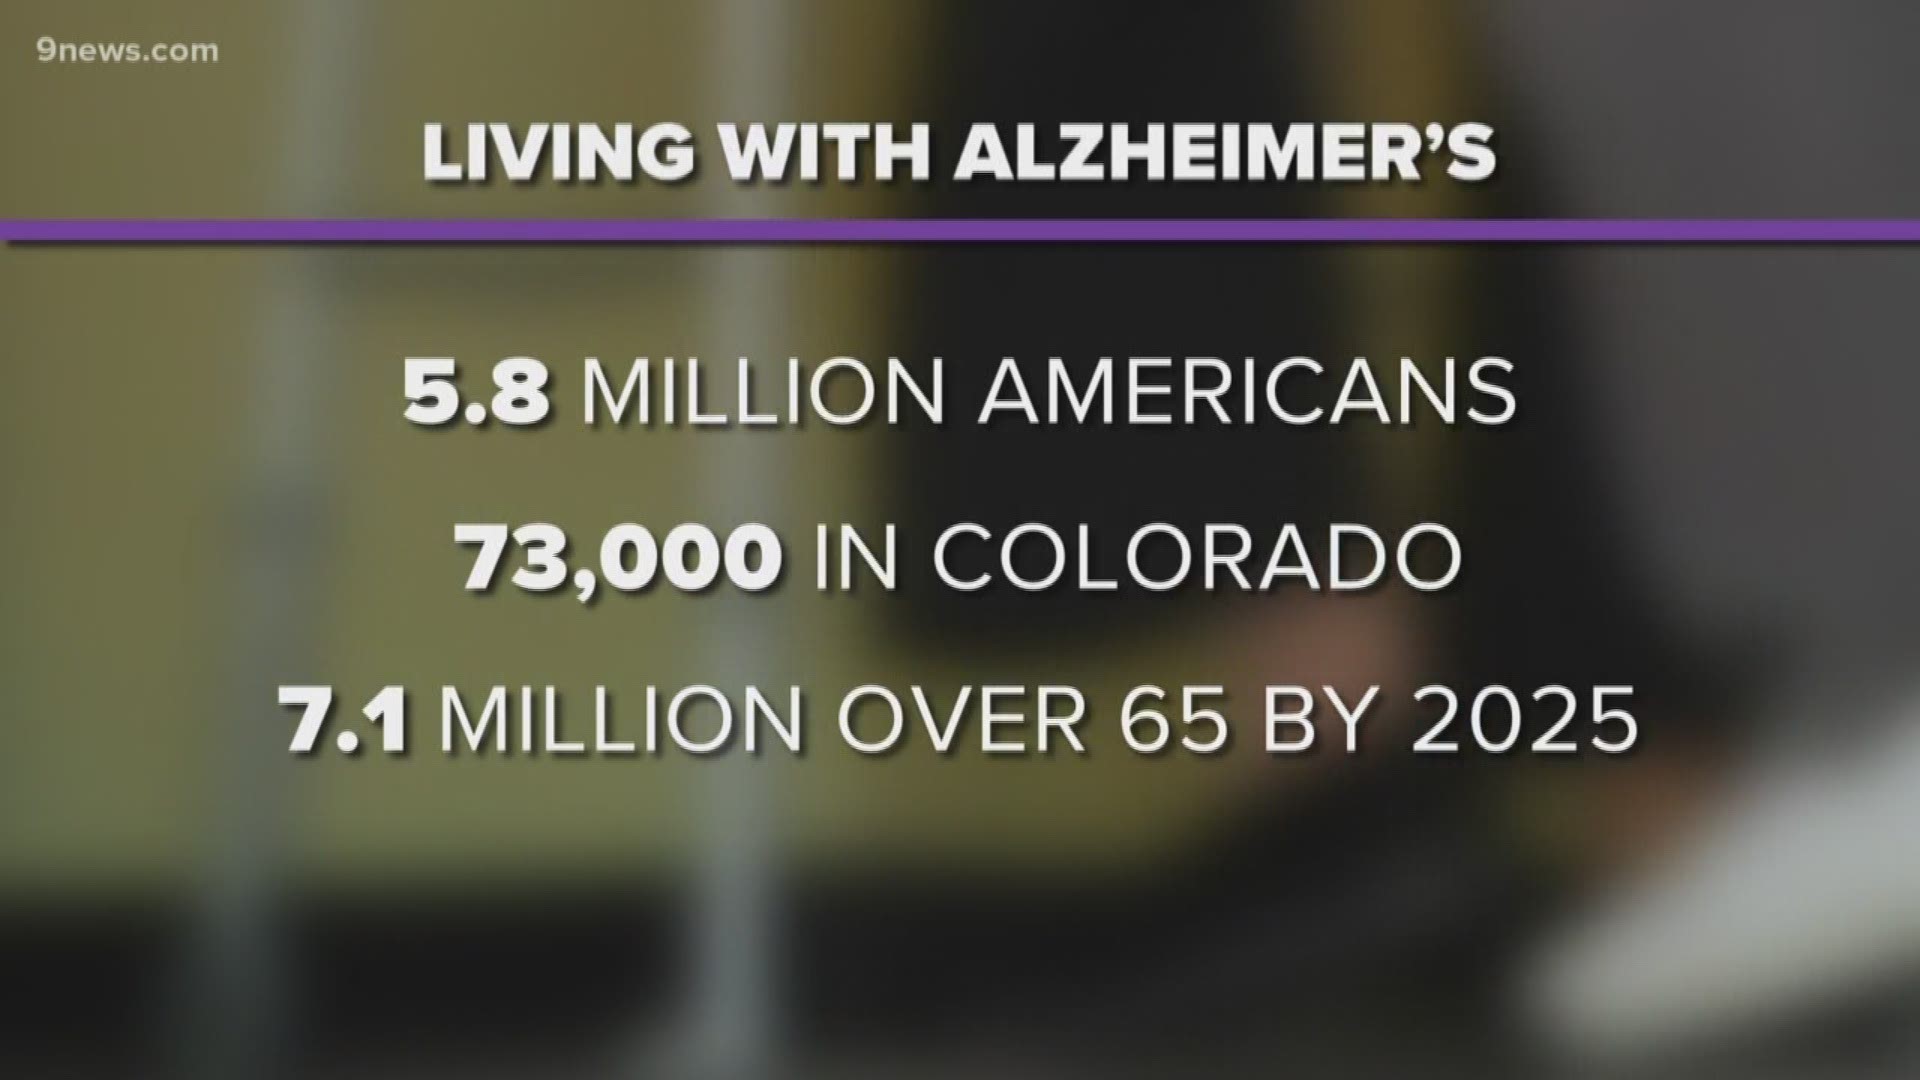 The Bowlen family has become an inspiration for the tens of thousands of Coloradans battling Alzheimer's disease.